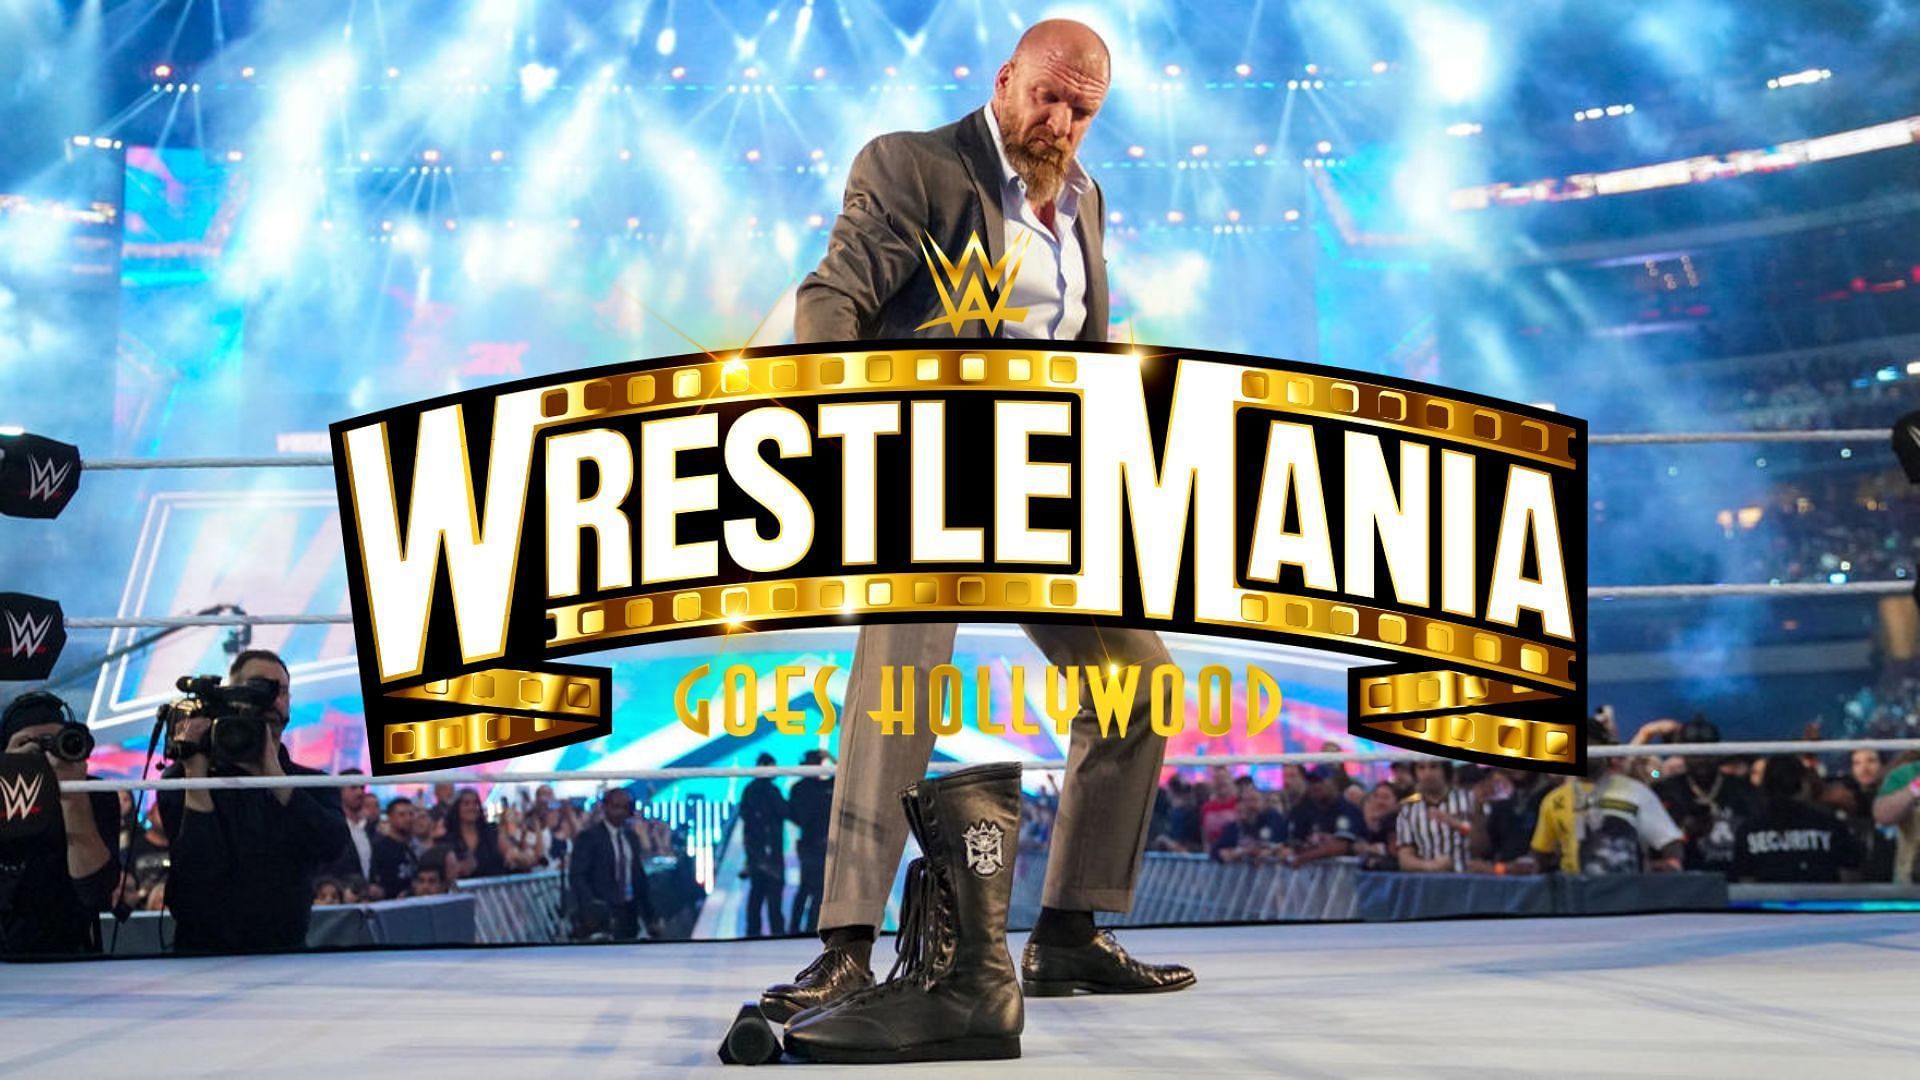 Triple H left his boots in the ring at WrestleMania last year